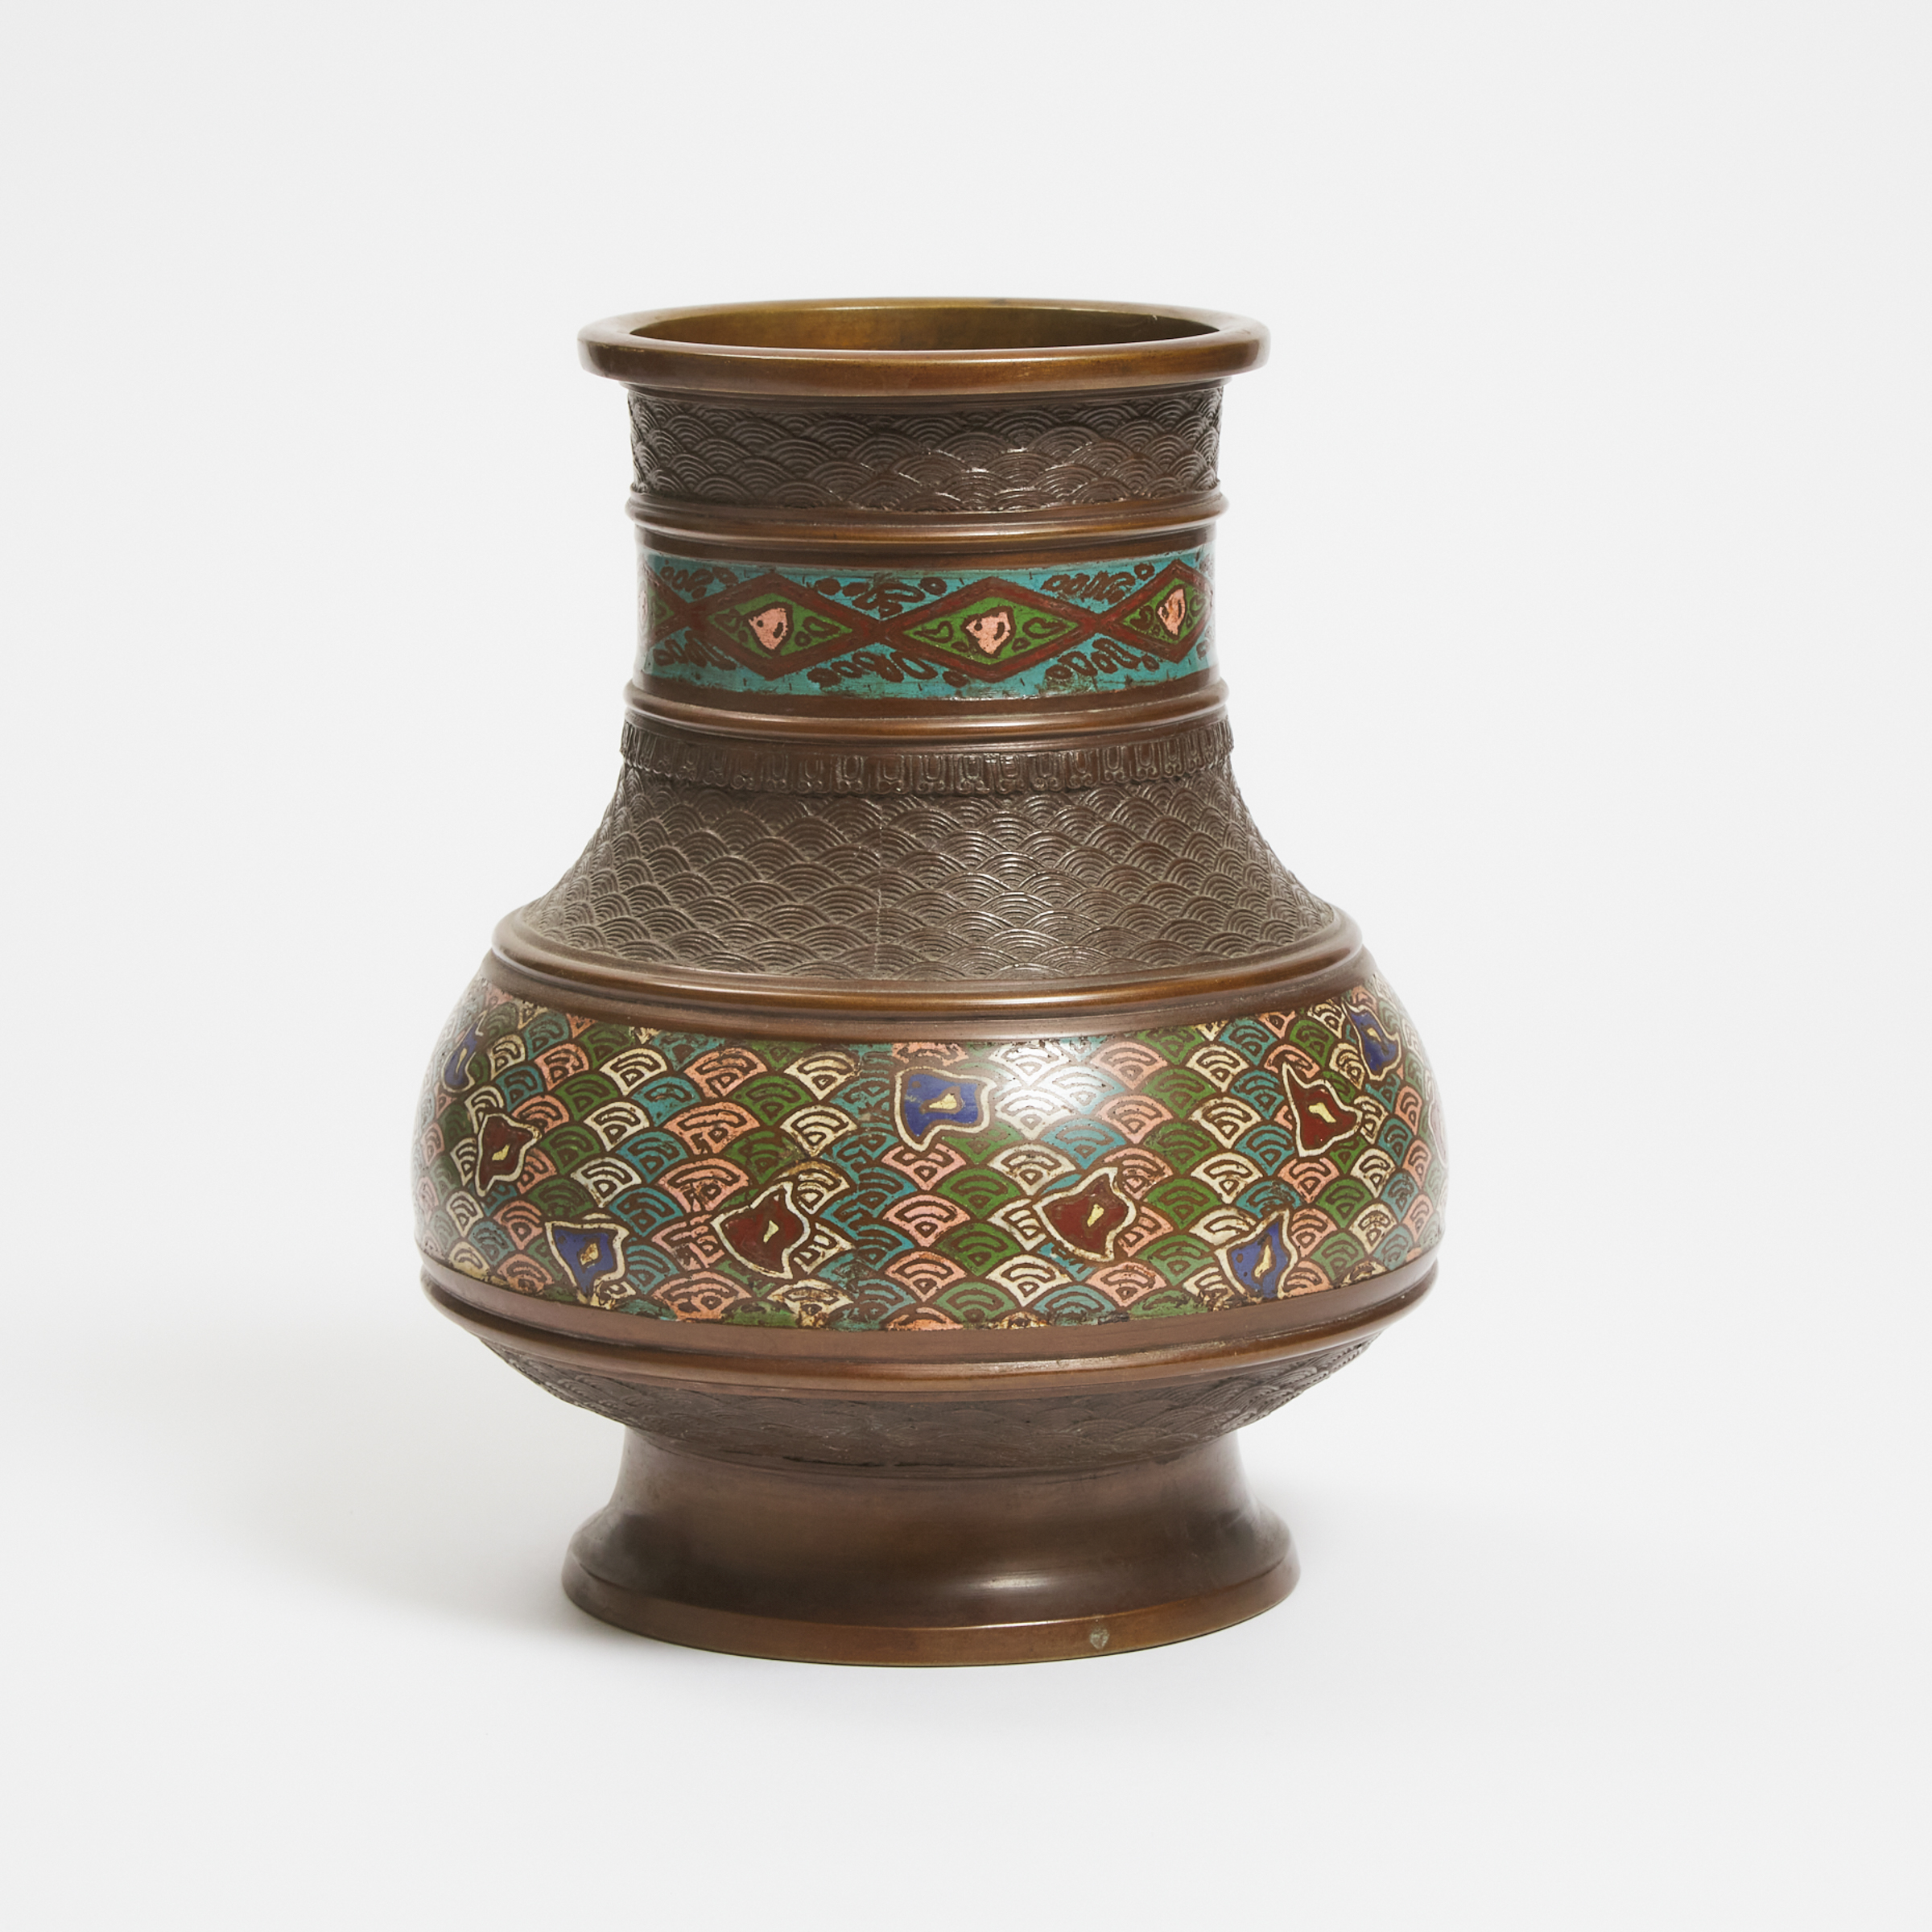 A Japanese Bronze Champlevé Enamel Vase, Late 19th/Early 20th Century